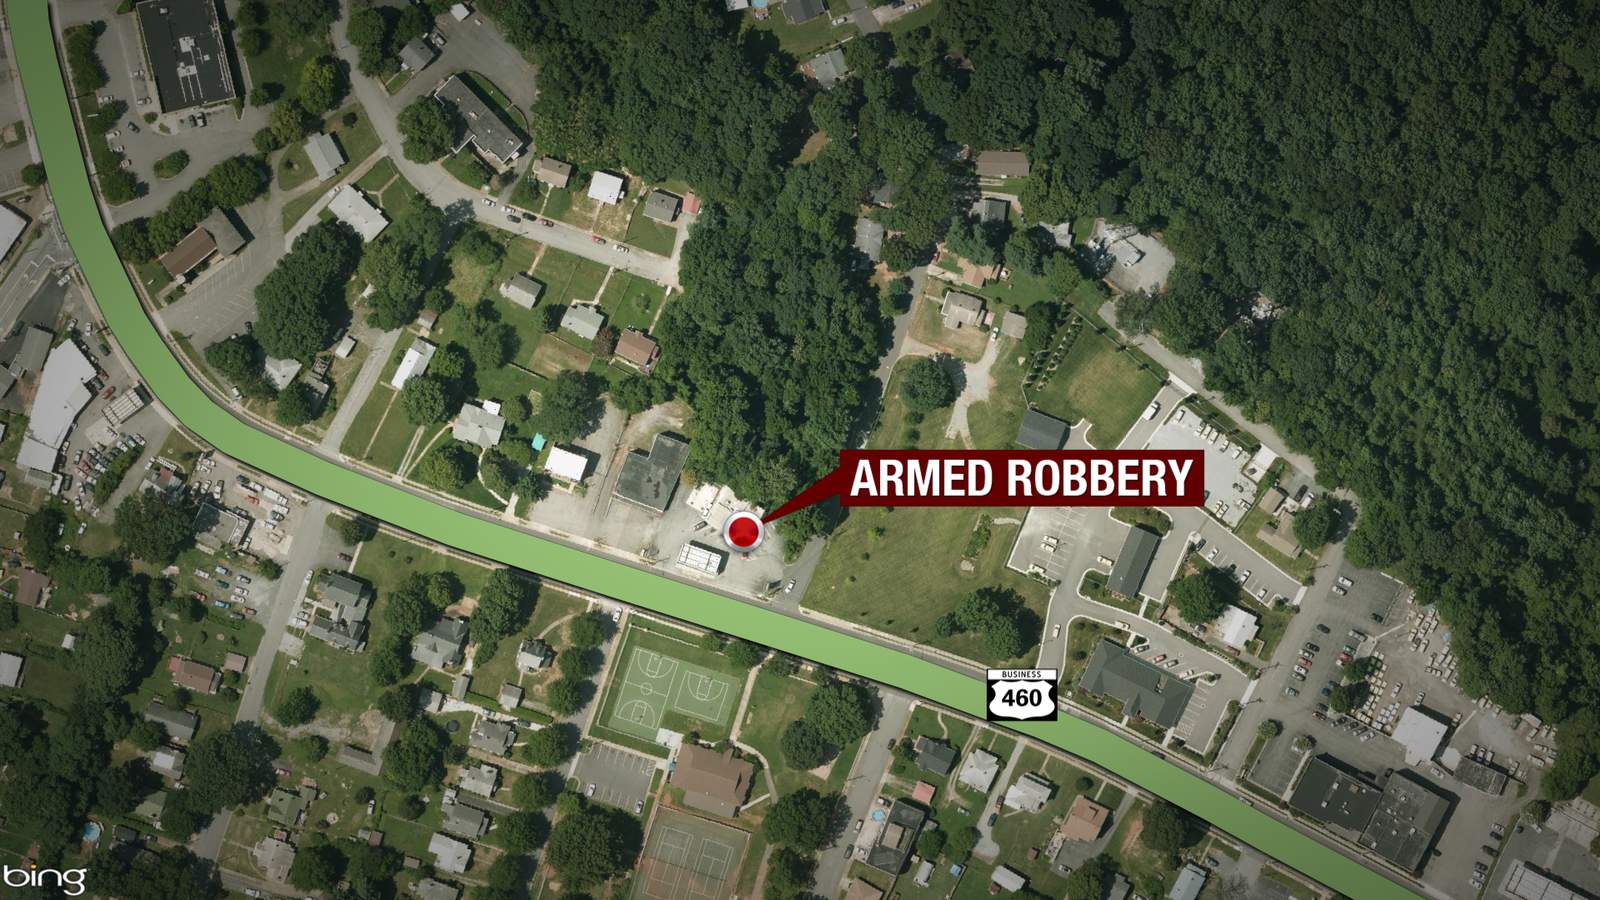 Lynchburg police searching for three armed robbery suspects